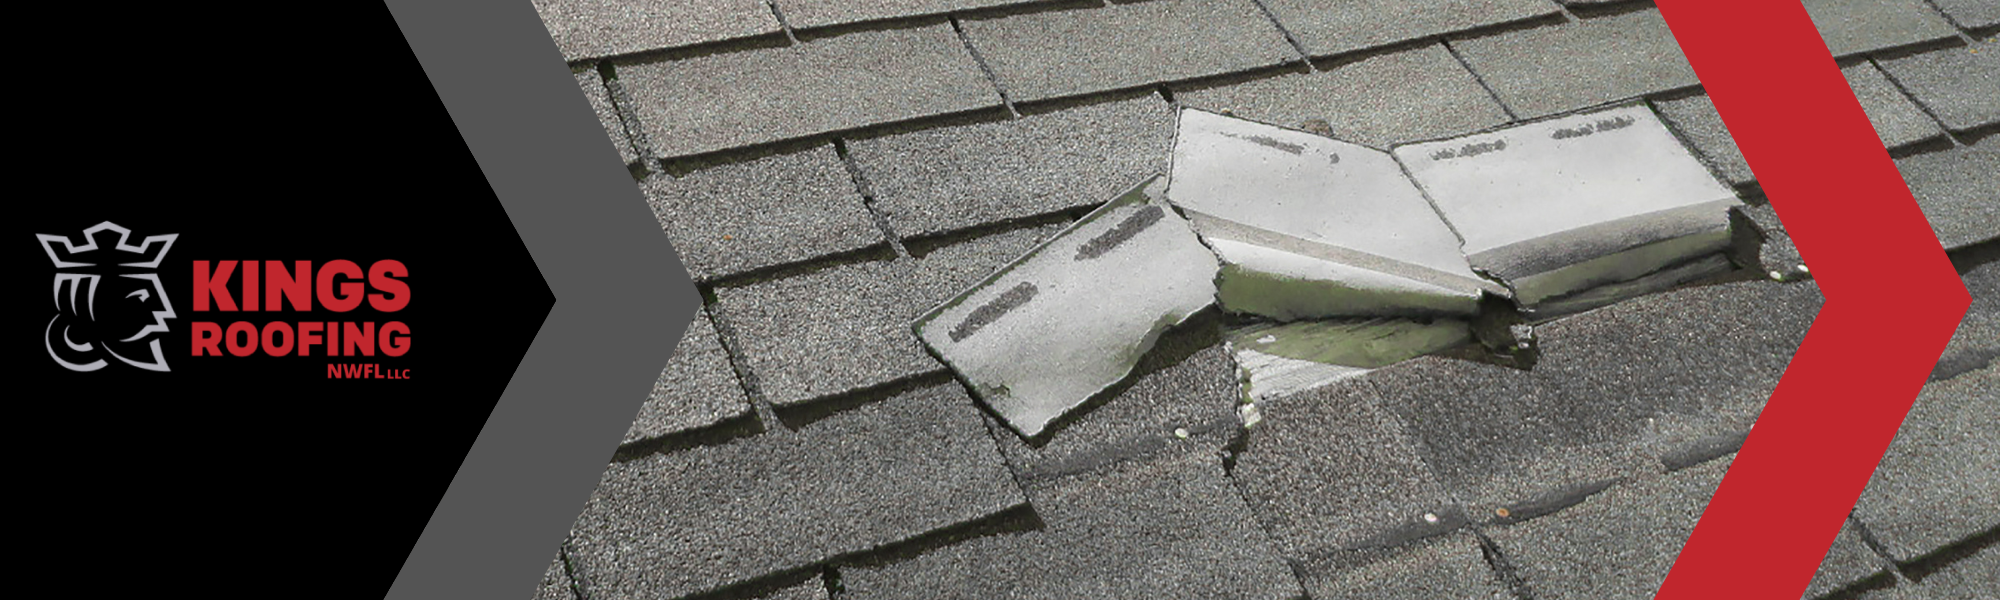 Trusted Roofing Company in Port Charlotte